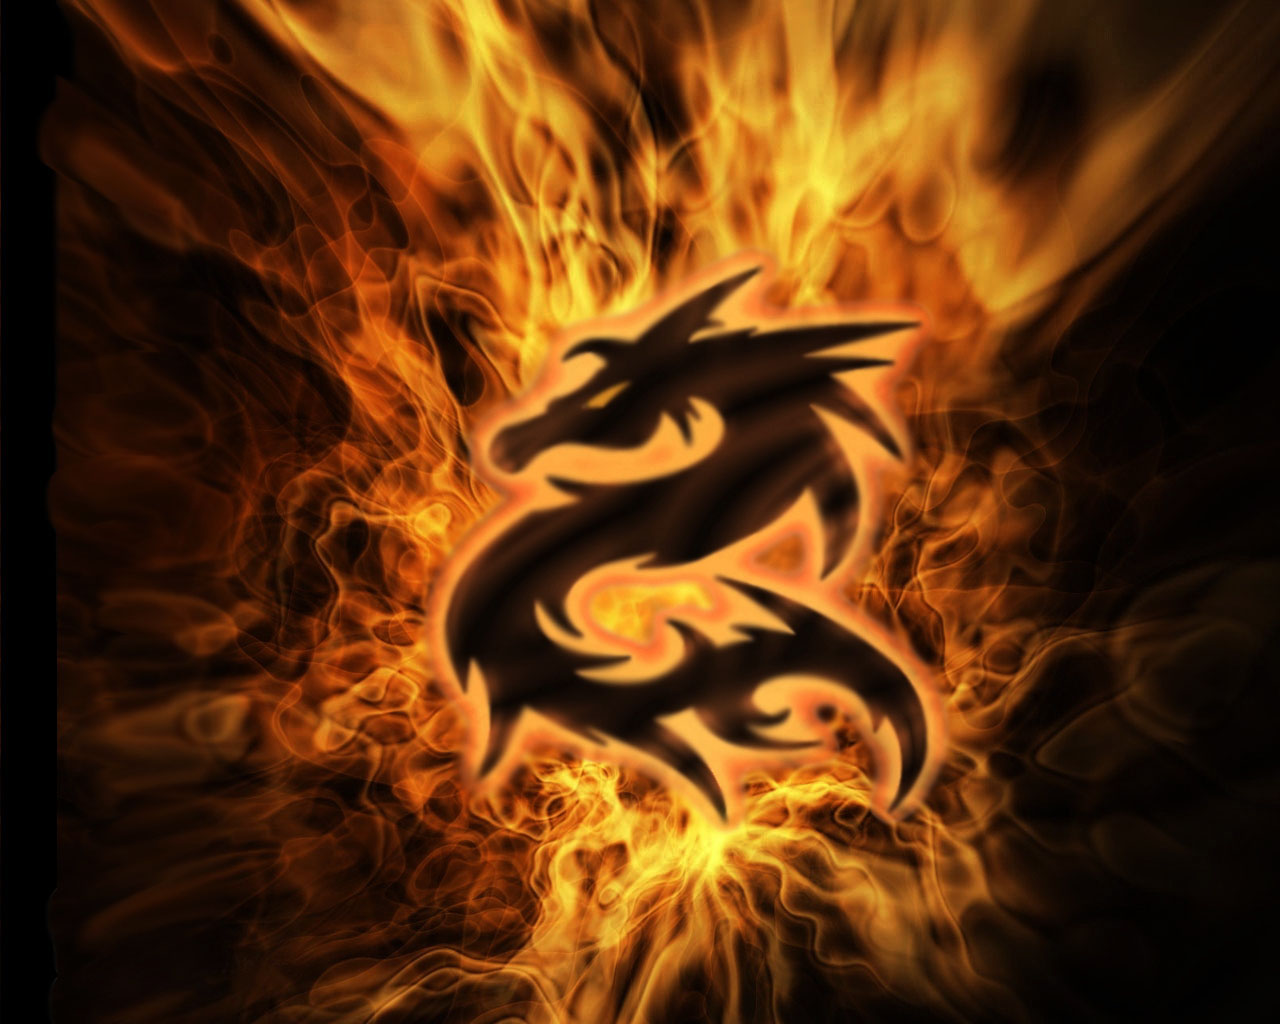  fire 3d pictures screensavers free wallpapers pictures free download